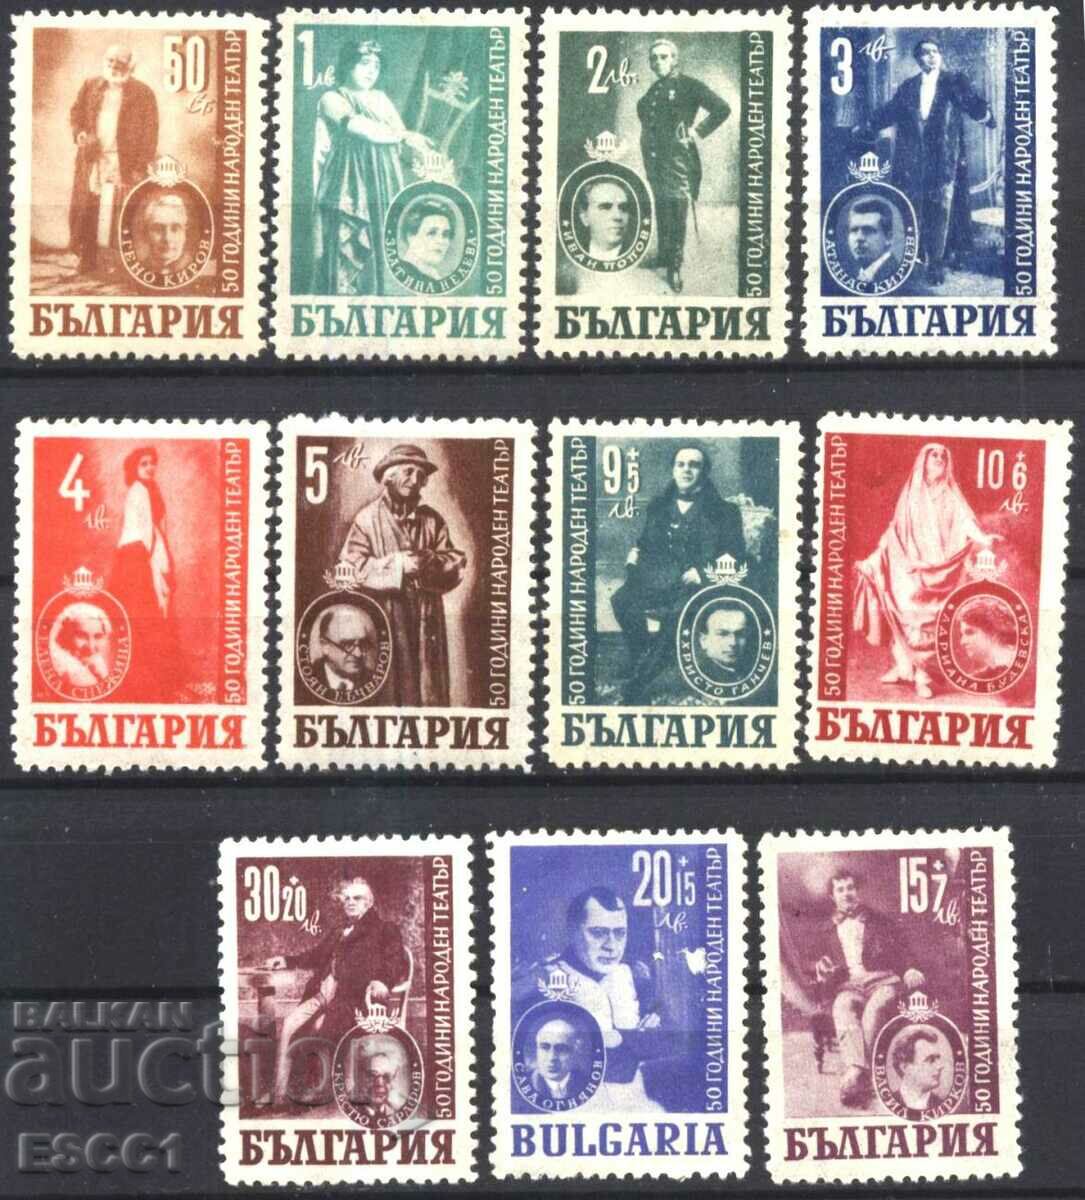 Clean stamps Meritorious artists National Theater 1947 Bulgaria